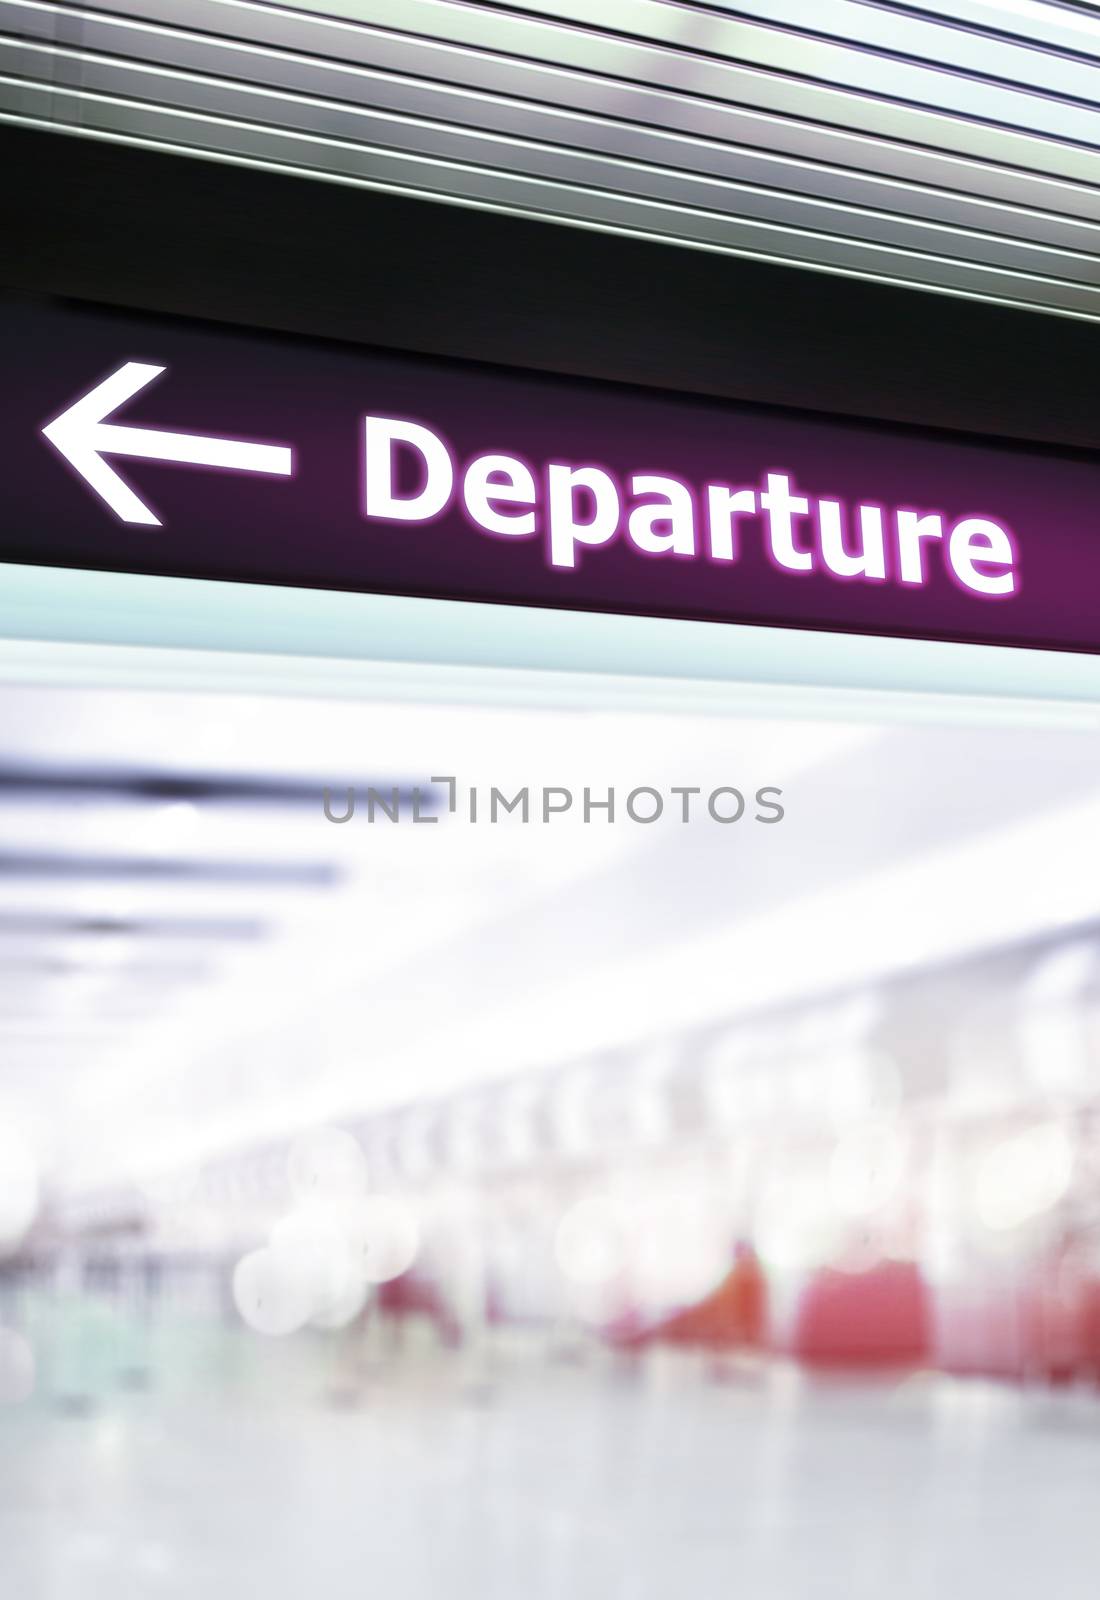 Tourist info signage in airport by ssuaphoto